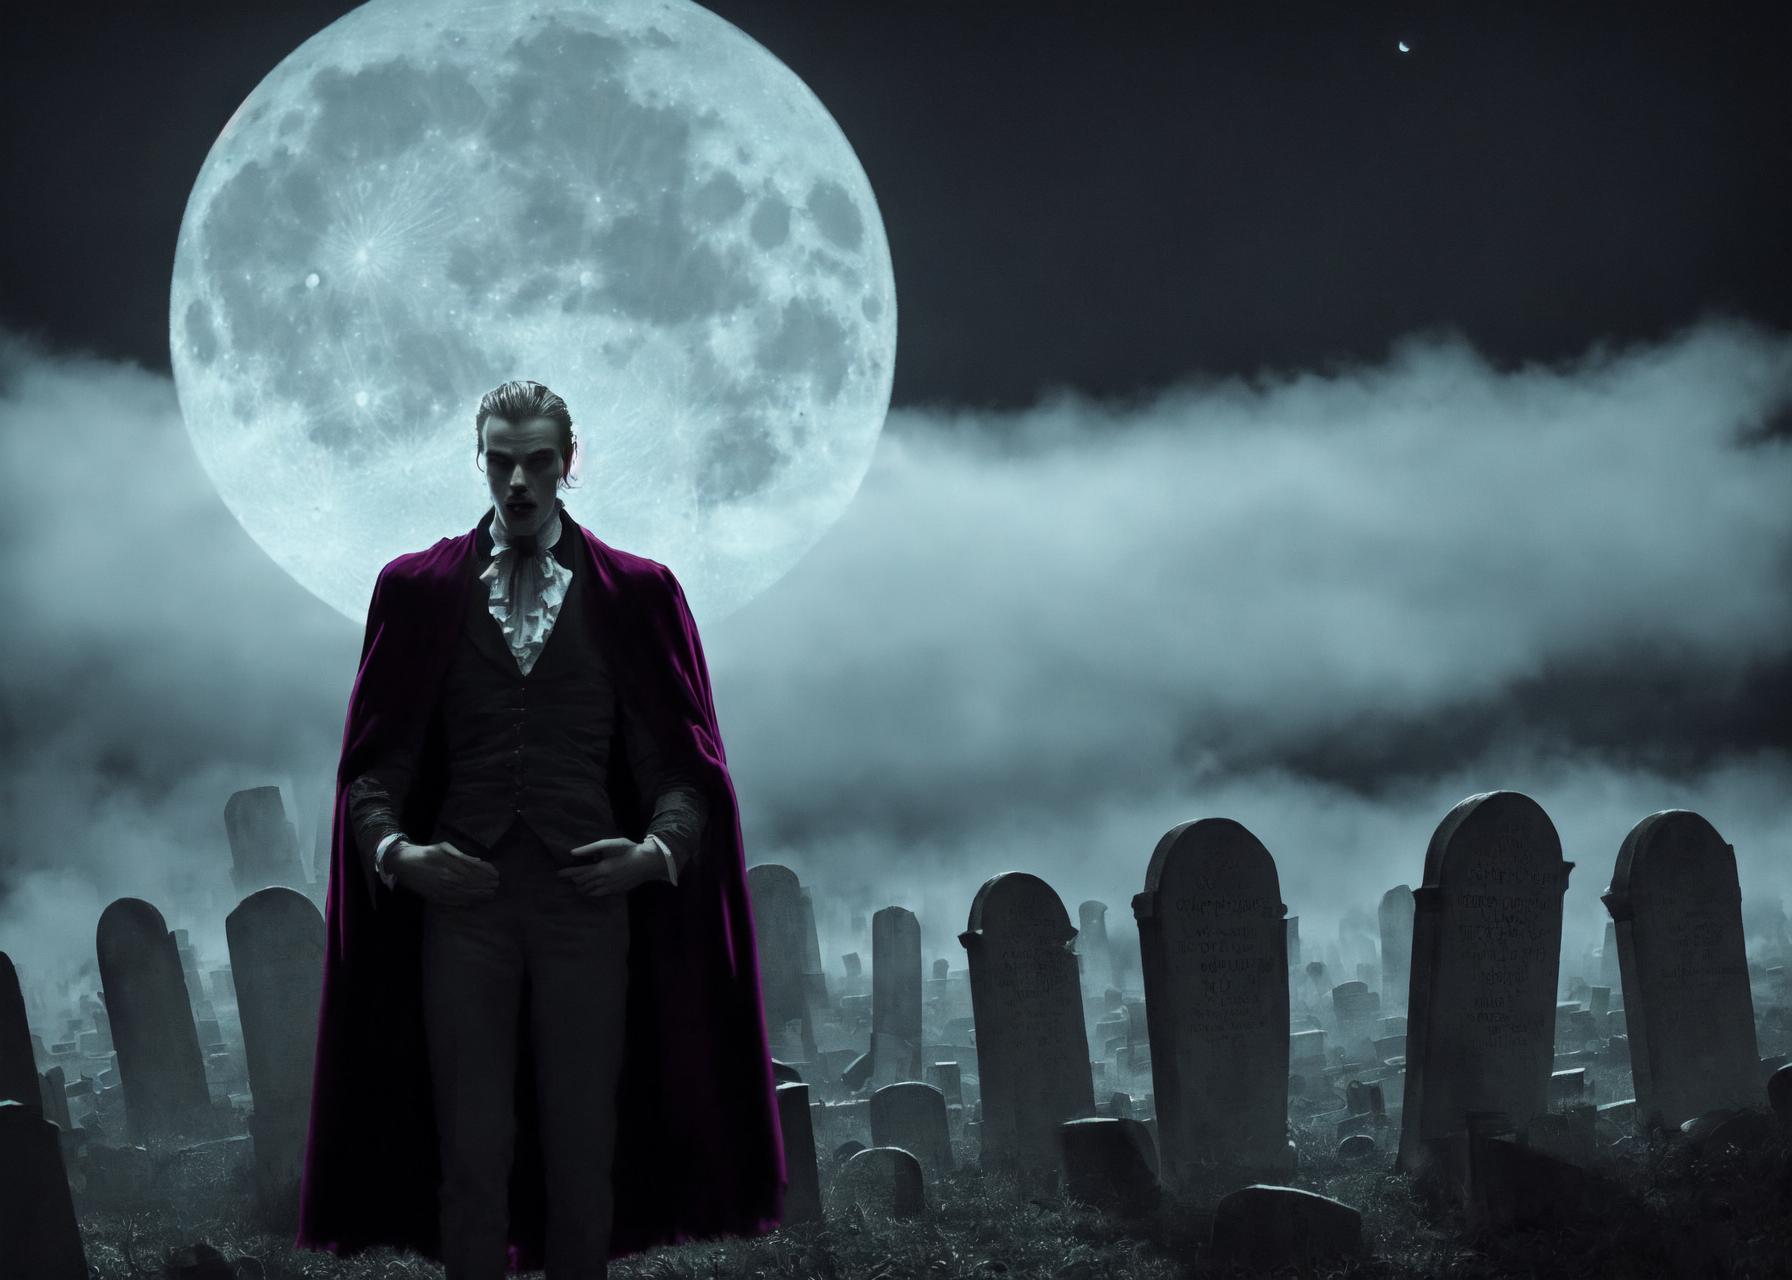 Artificial Intelligence (AI) generated image art, ... Count Dracula in a graveyard at night, Foggy with moon light, (style of Dan Mumford), vibrant colors, (gloomy illumination, insane, stunning, dramatic, completed artwork) , masterpiece, best quality, intricated details, UHD, HDR10, 8k,